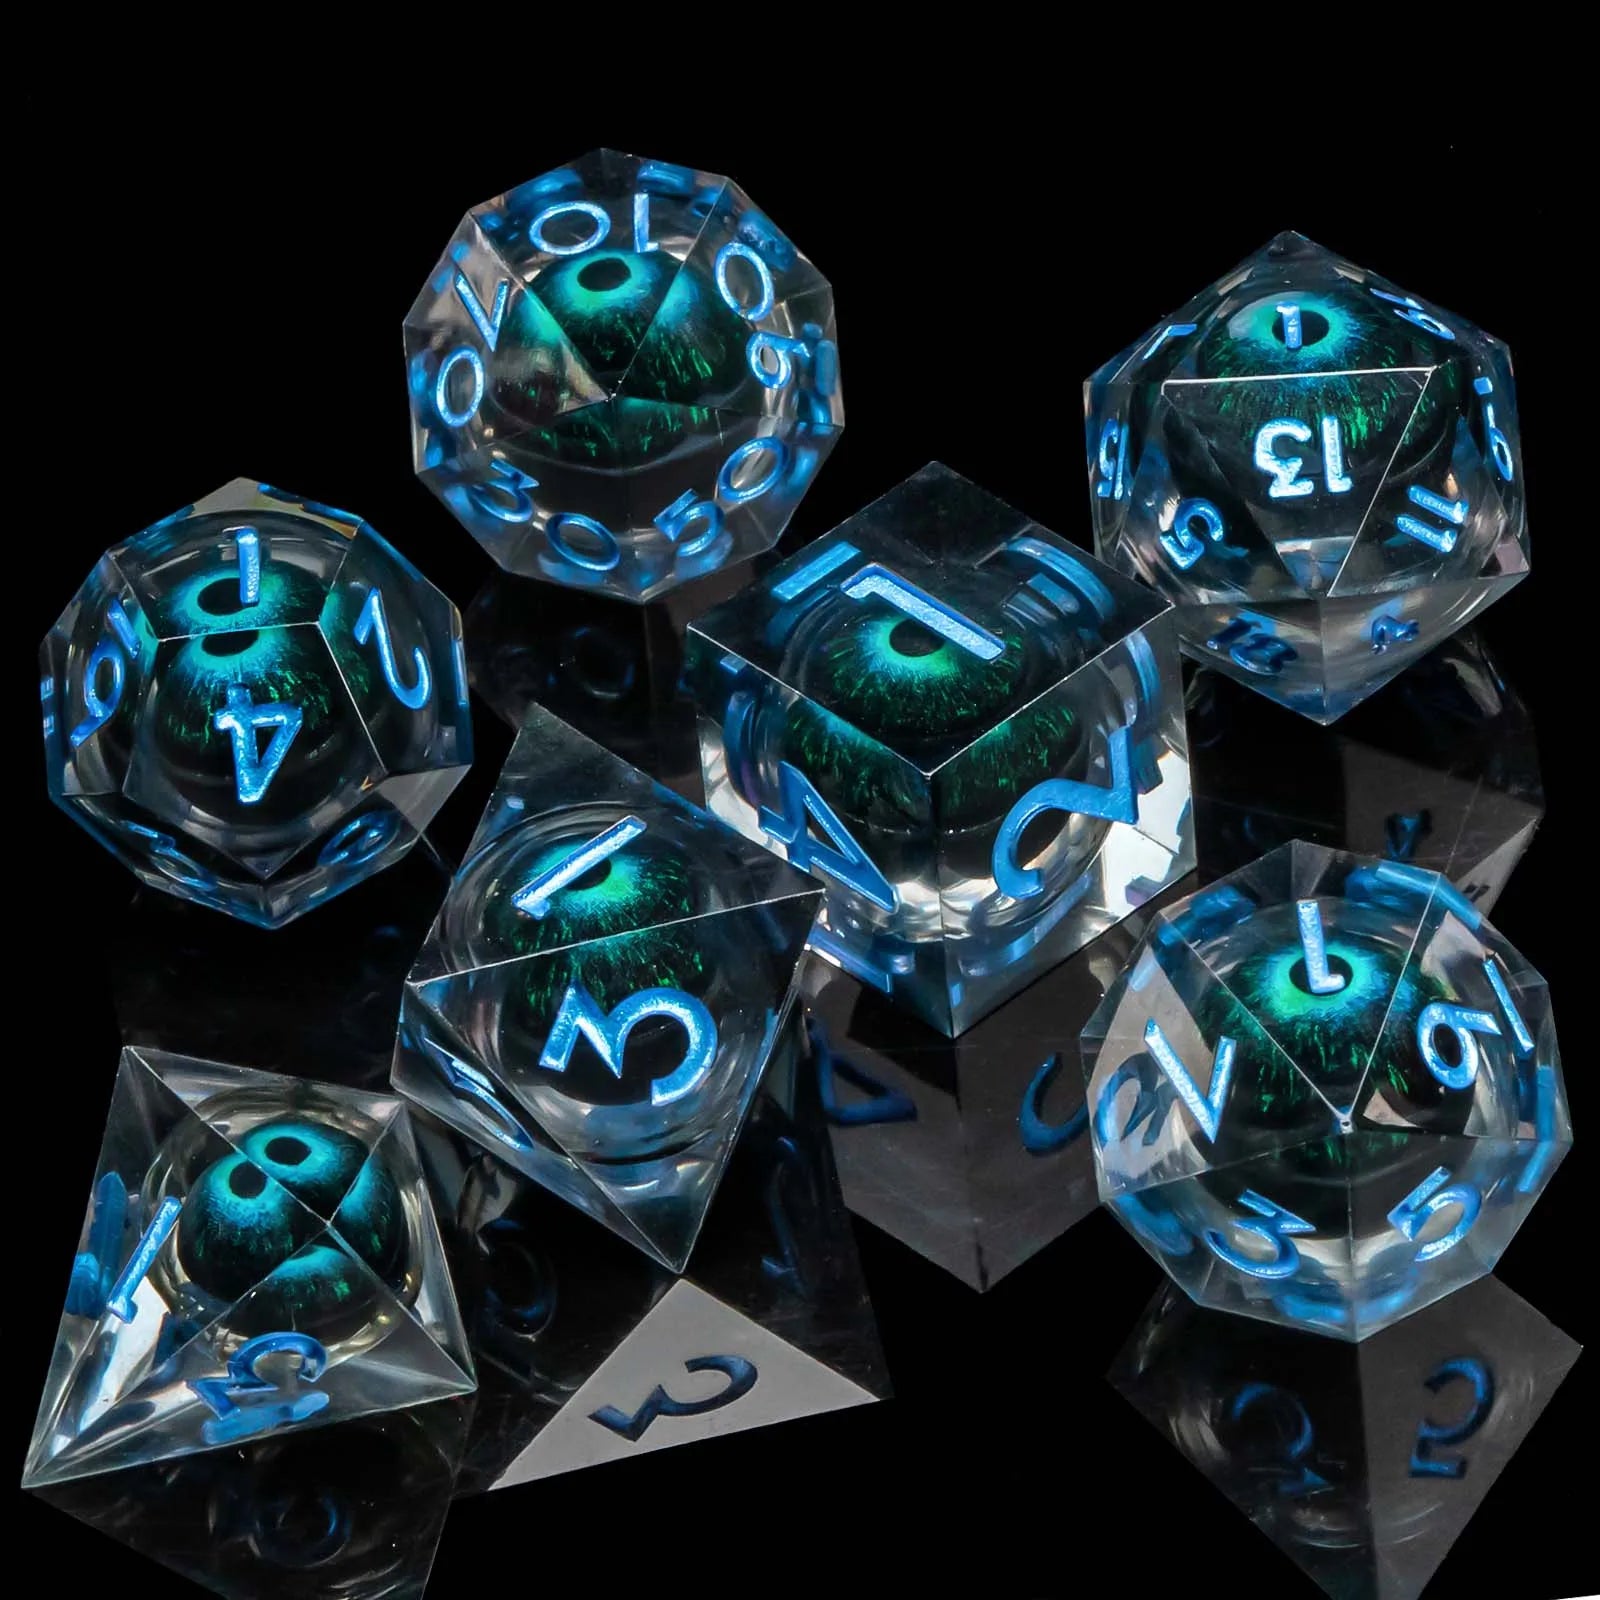 DND Eye Liquid Flow Core Resin D&D Dice Set For D and D Dungeon and Dragon Pathfinder Table Role Playing Game Polyhedral Dice AZ08